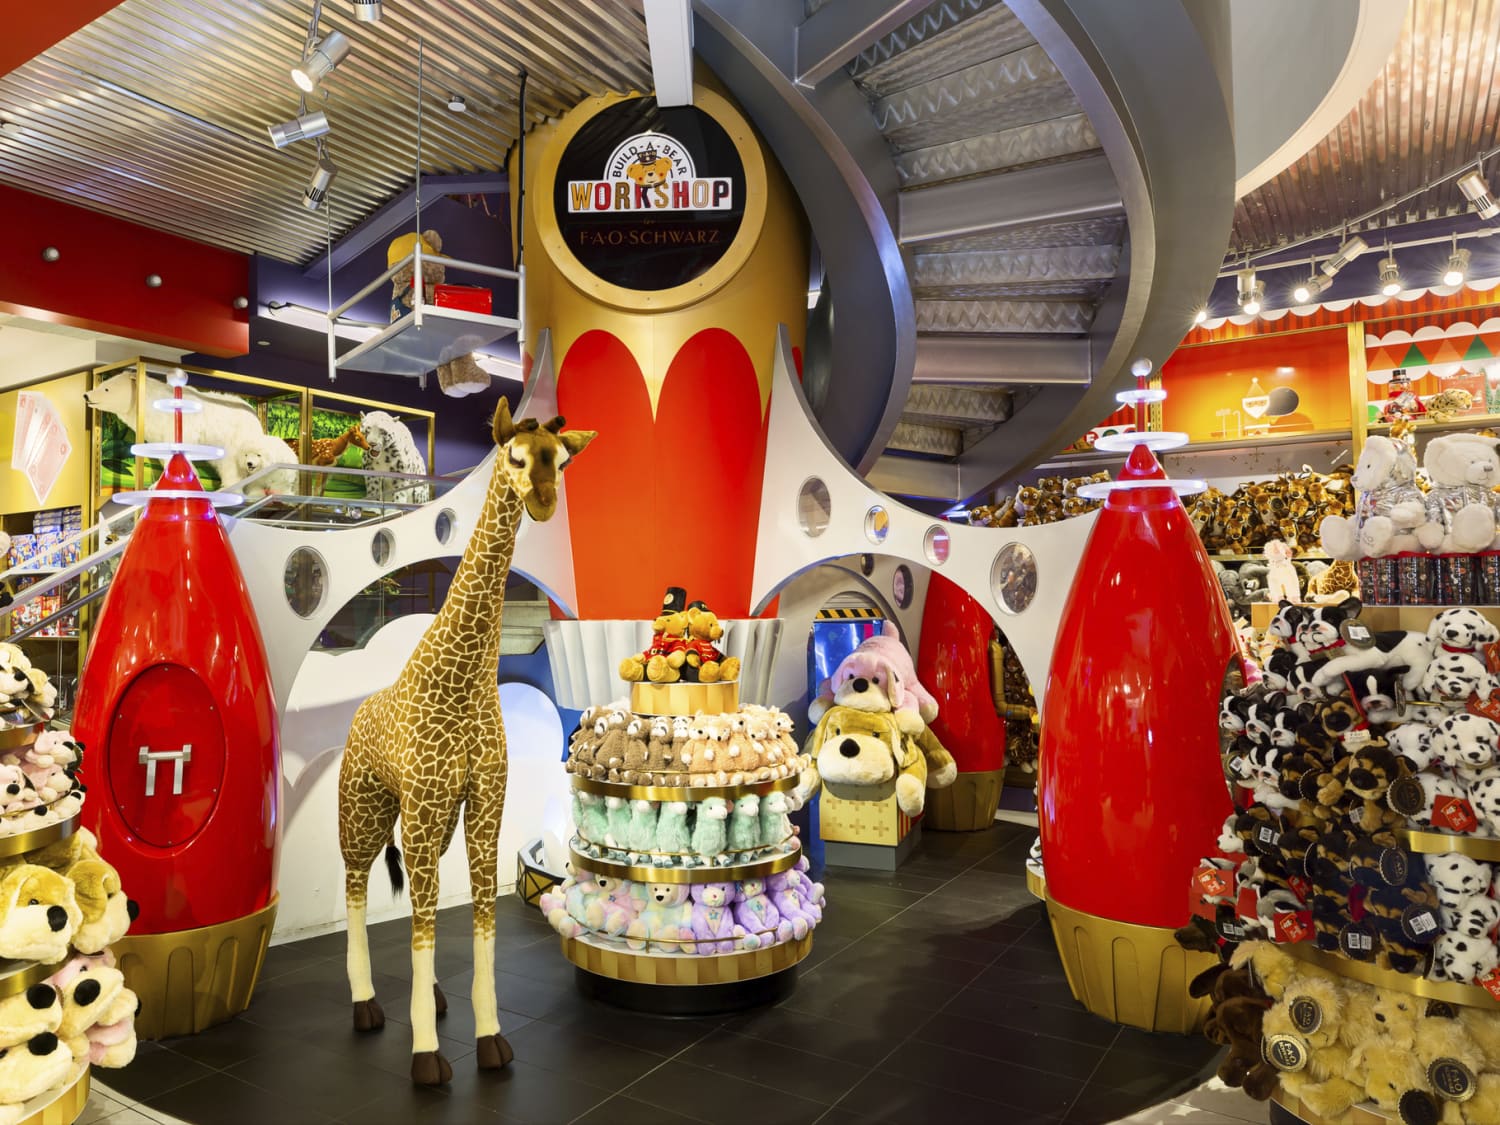 FAO Schwarz Iconic Toys For Kids - Brands